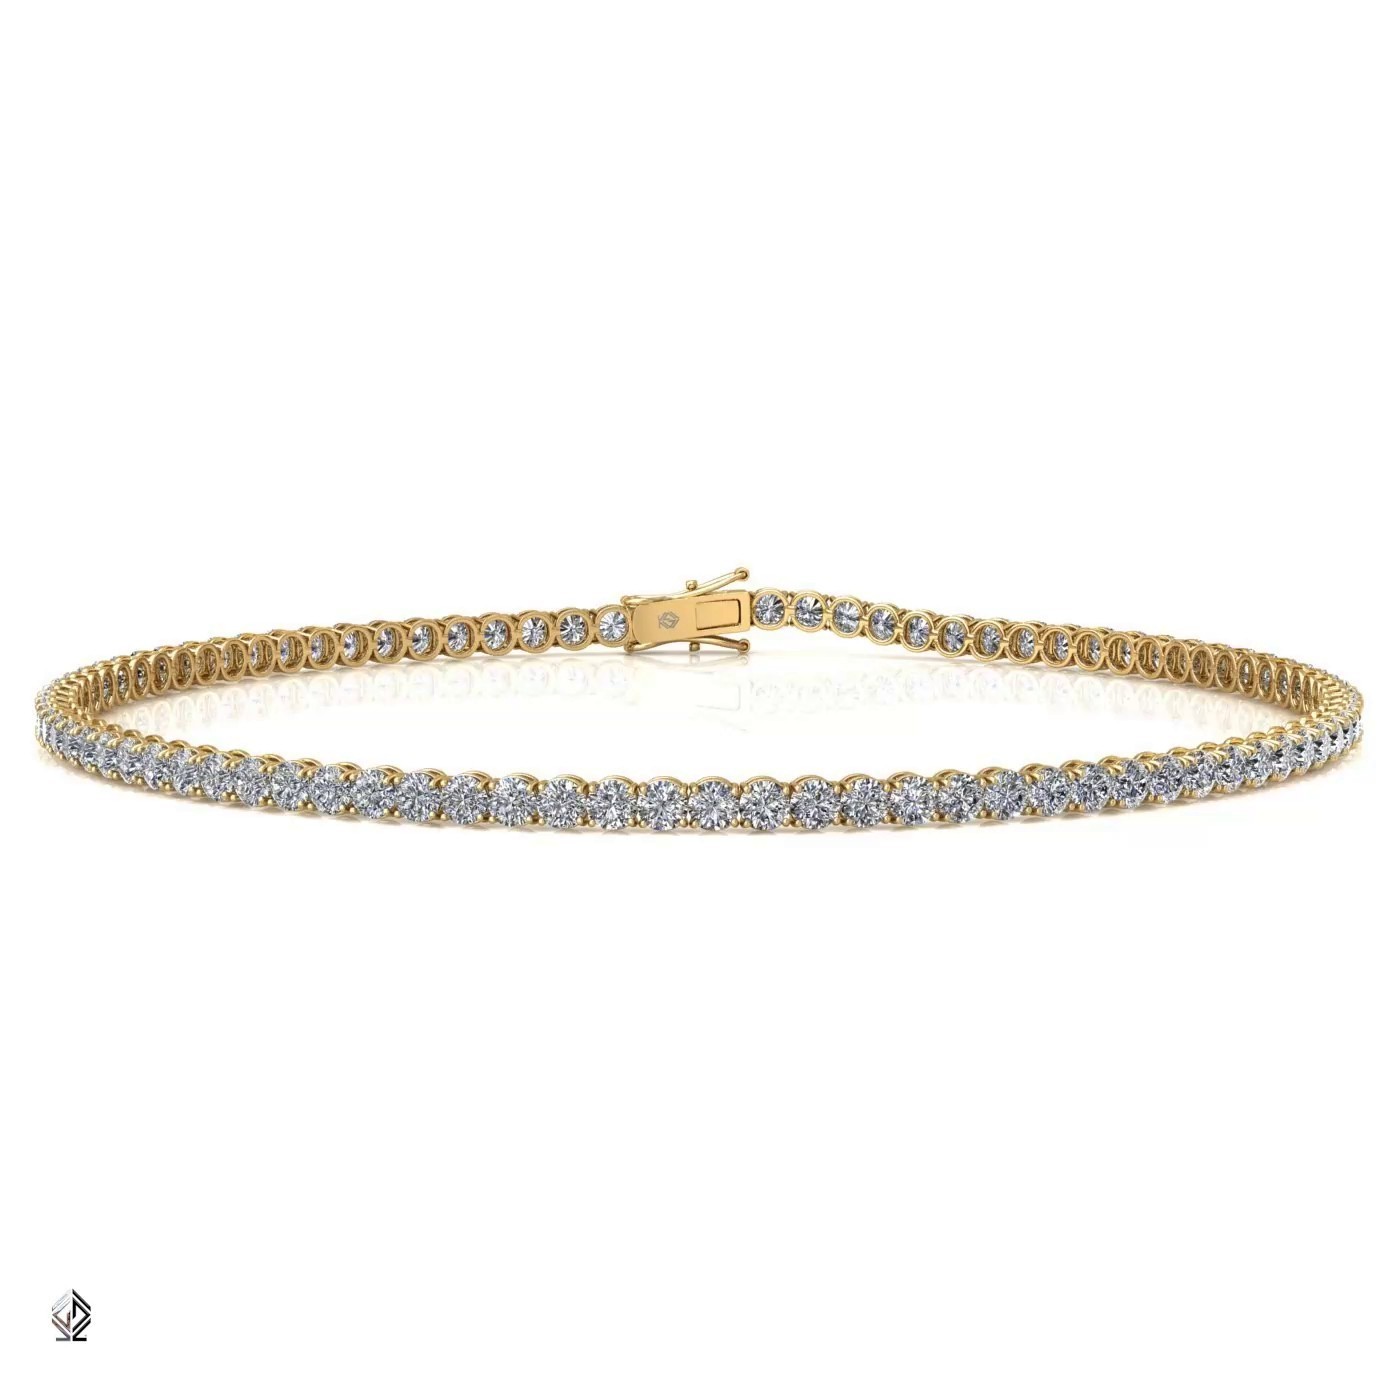 18k yellow gold 3.8mm 4 prong round shape diamond tennis bracelet in round setting Photos & images